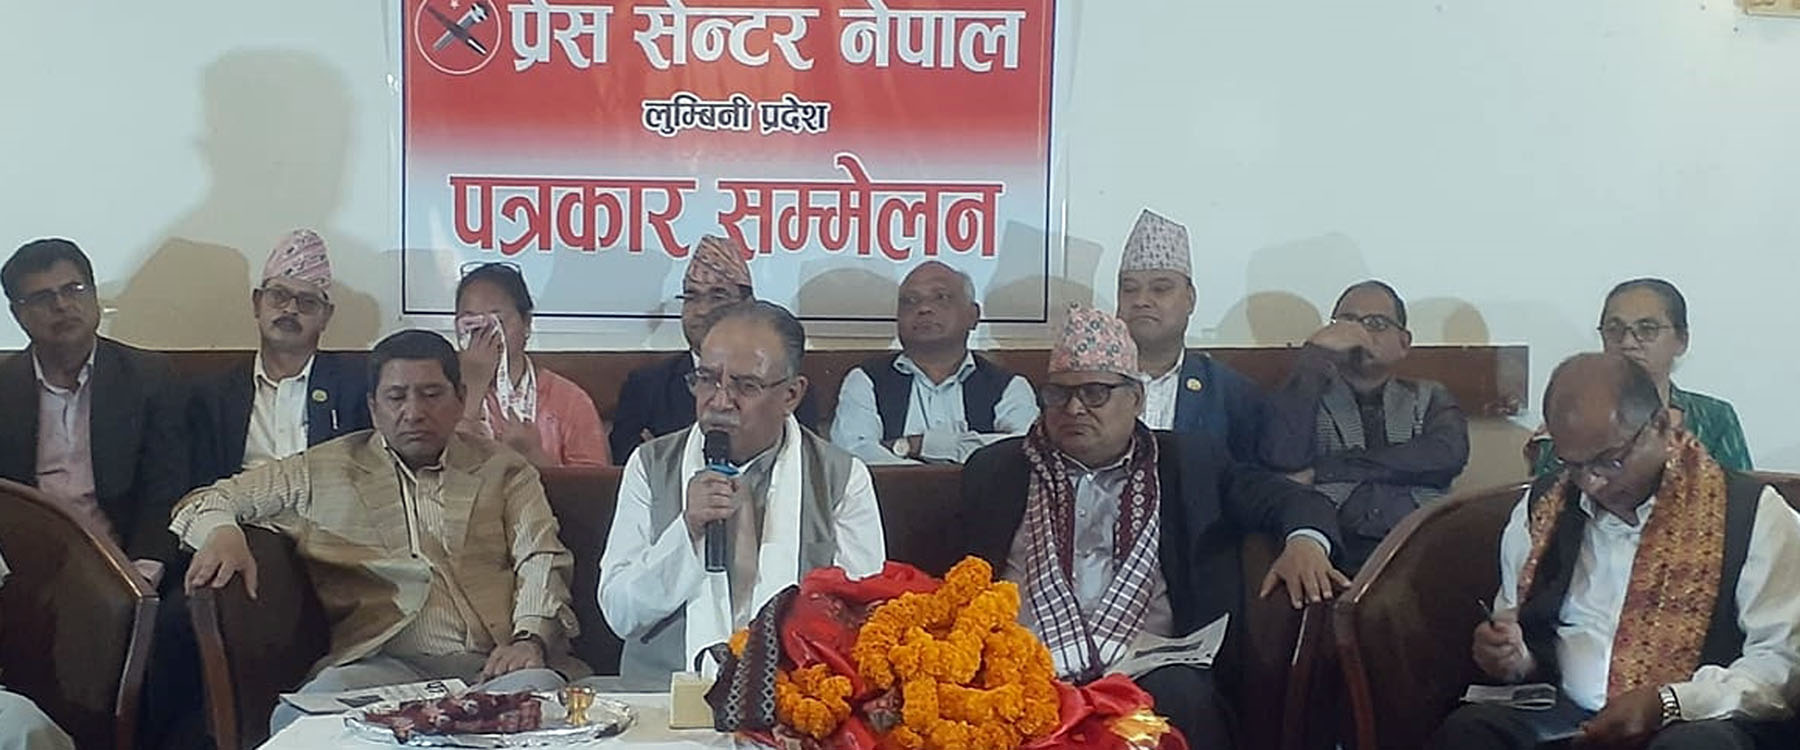 no-immediate-possibility-of-alliance-with-uml-chair-dahal